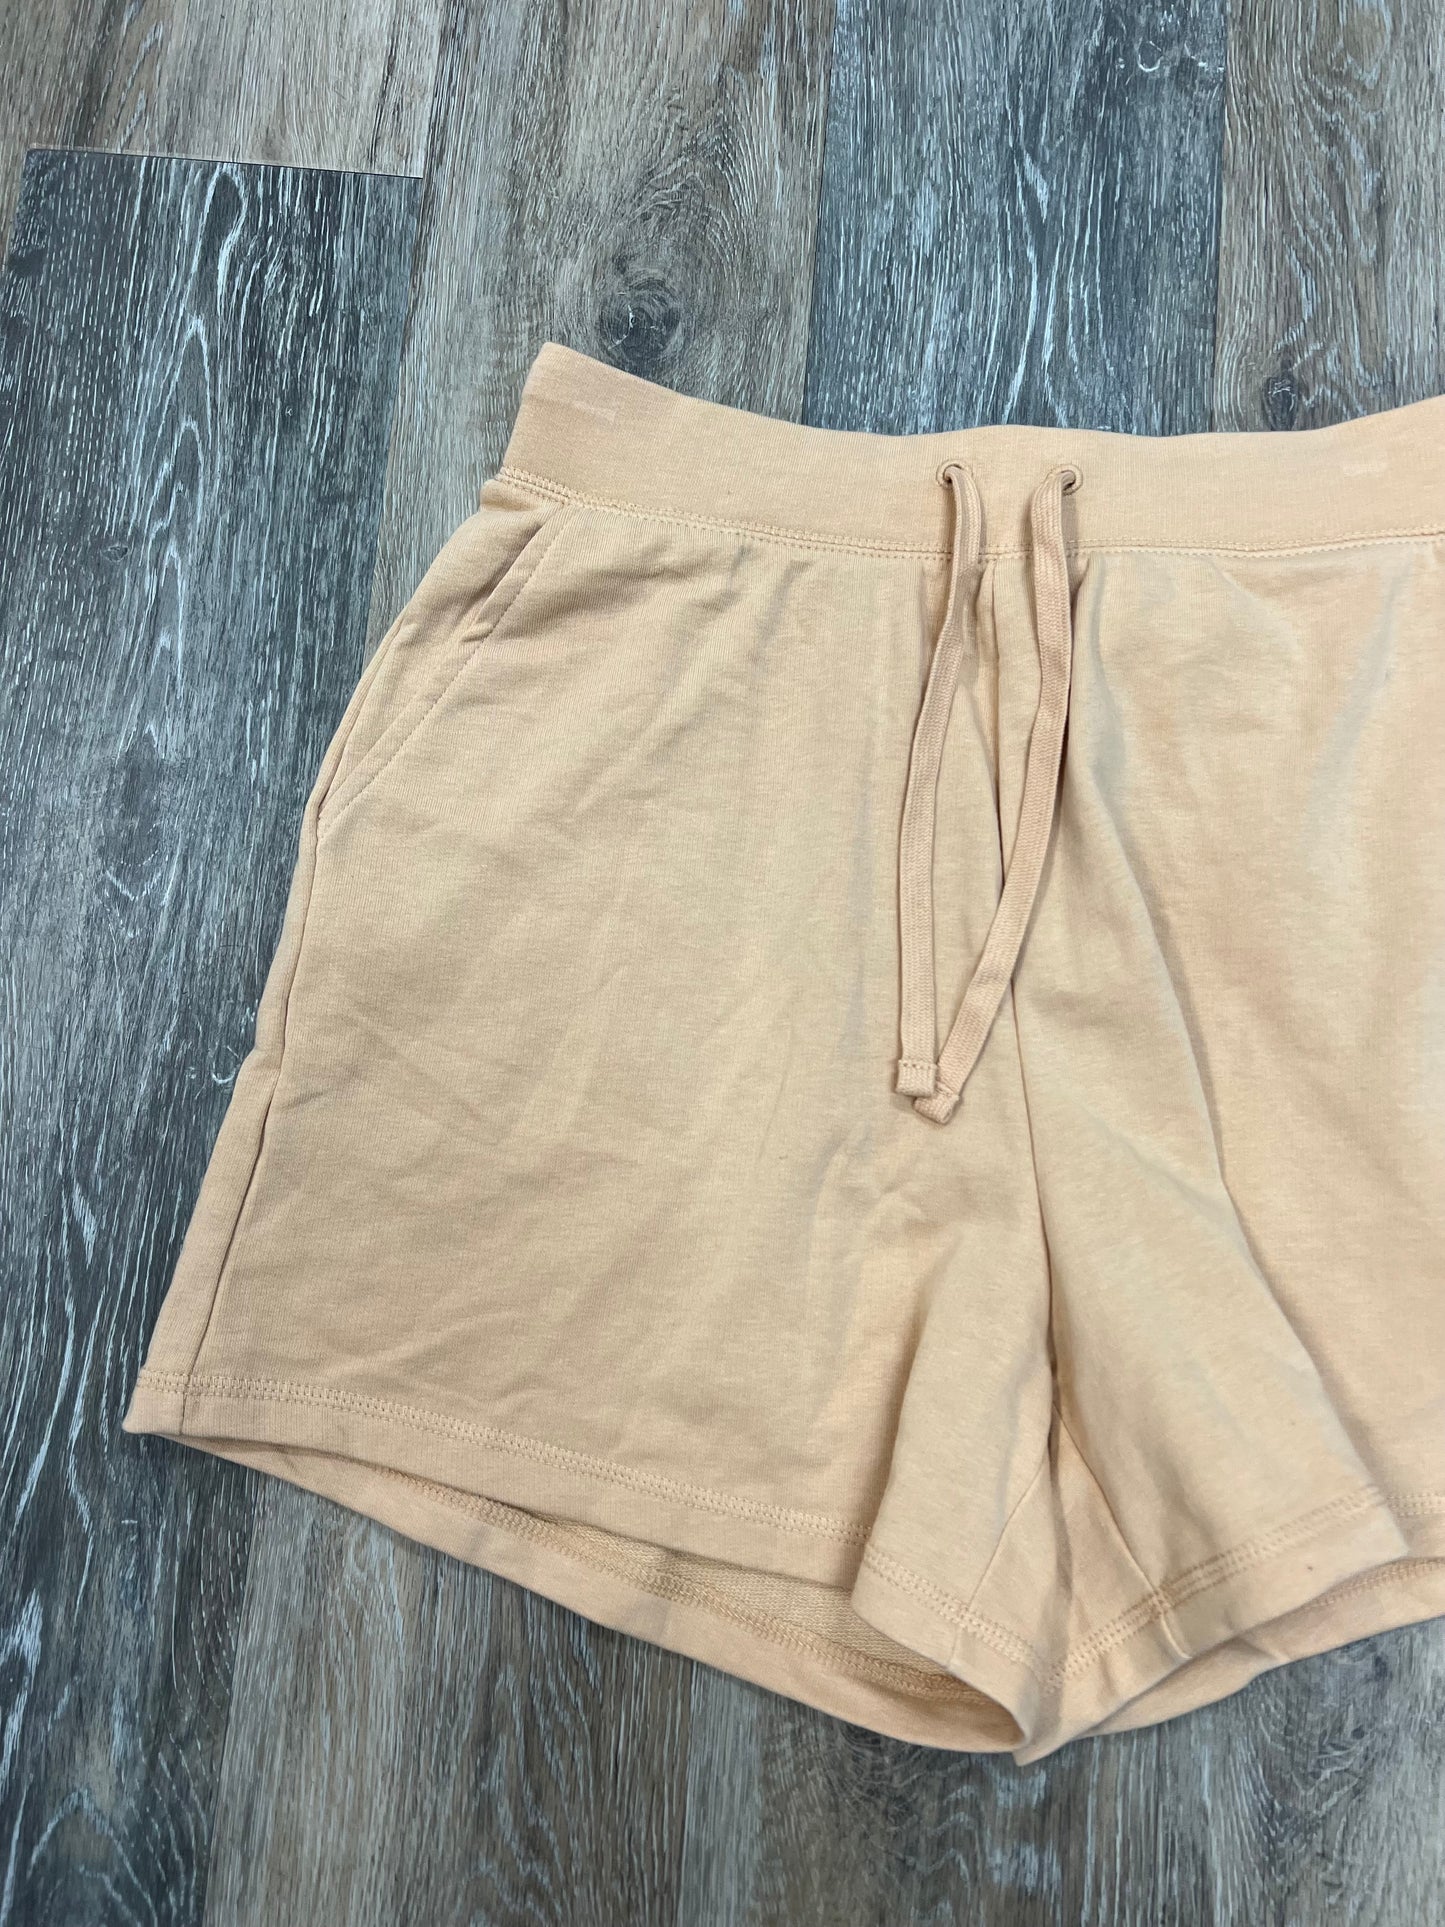 Shorts By Old Navy  Size: M (Tall)